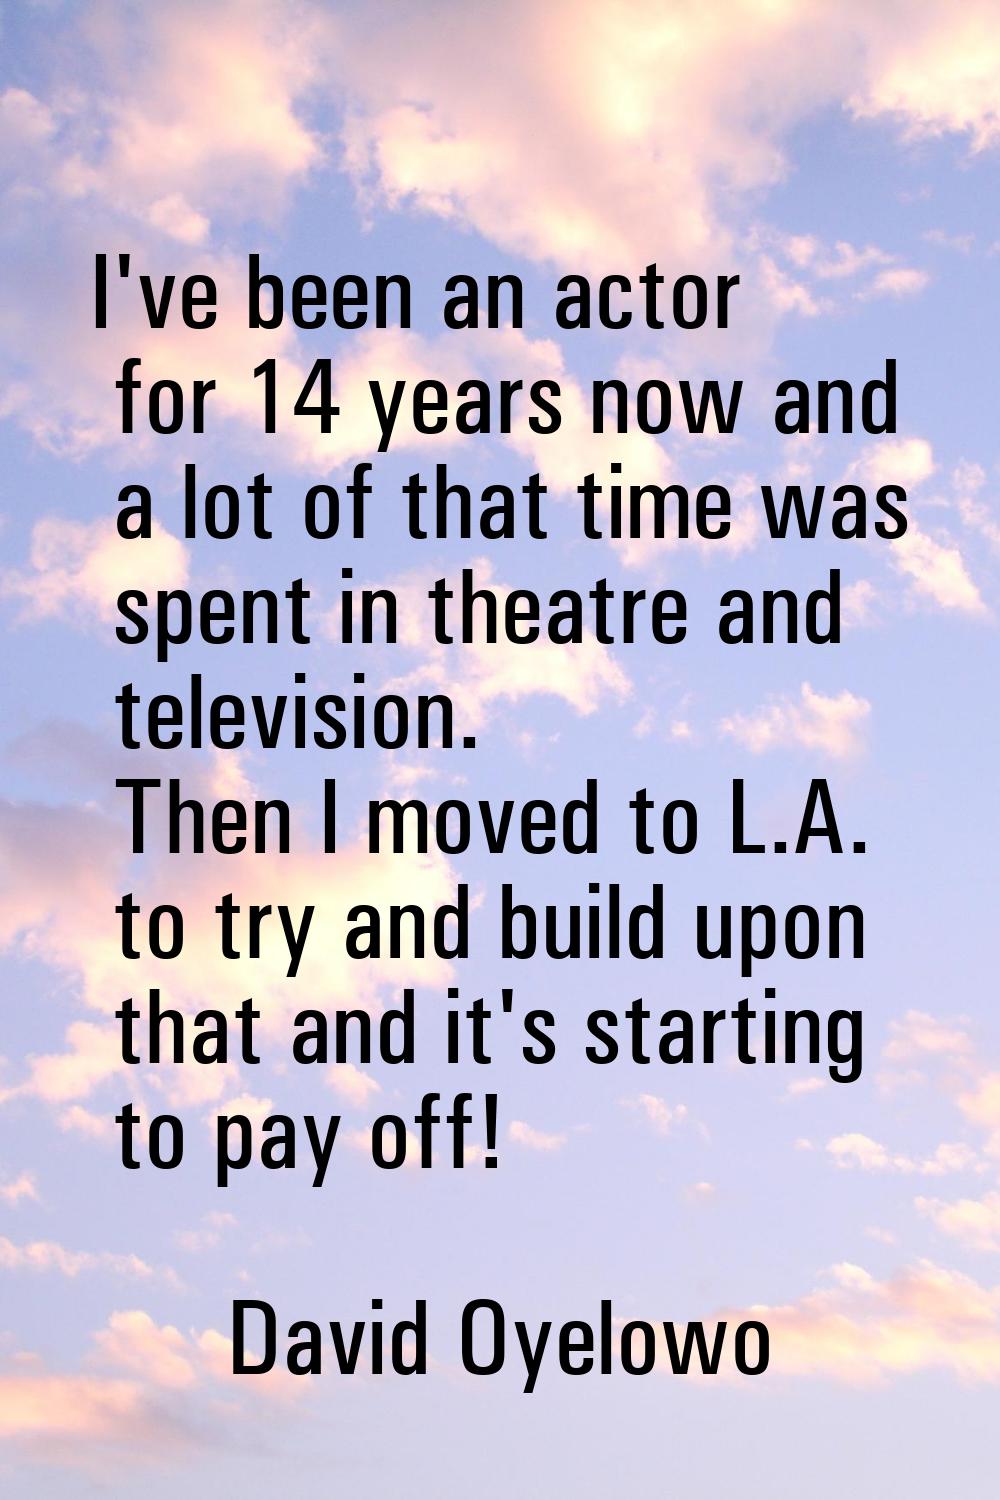 I've been an actor for 14 years now and a lot of that time was spent in theatre and television. The